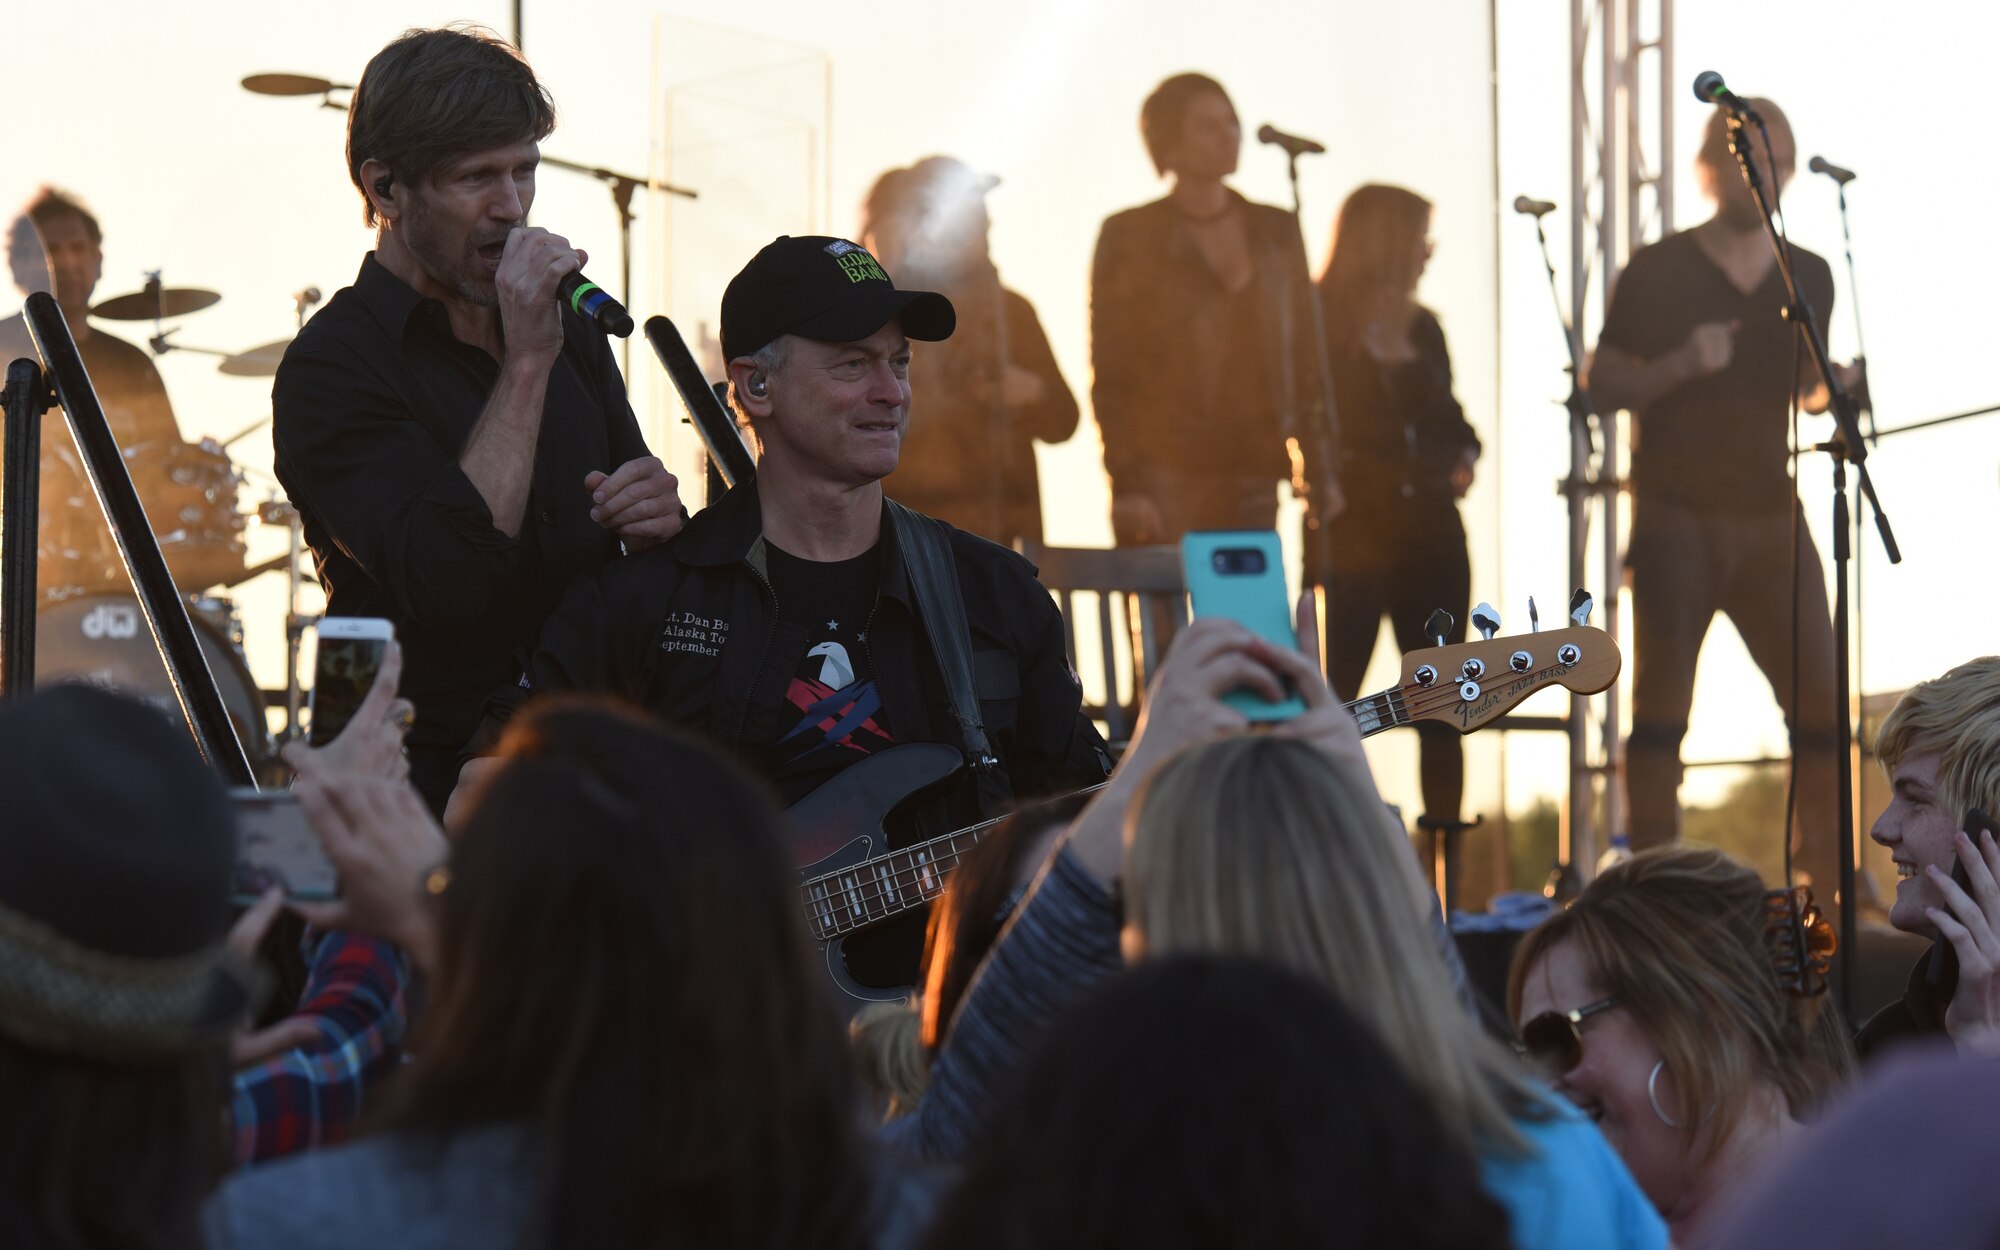 Jeff Vezain, Lt. Dan Band lead singer, sings a song while standing behind Gary Sinise, band founder, during a concert at Tyndall Air Force Base, Fla., March 4, 2018. (U.S. Air Force photo by Airman 1st Class Solomon Cook/Released)